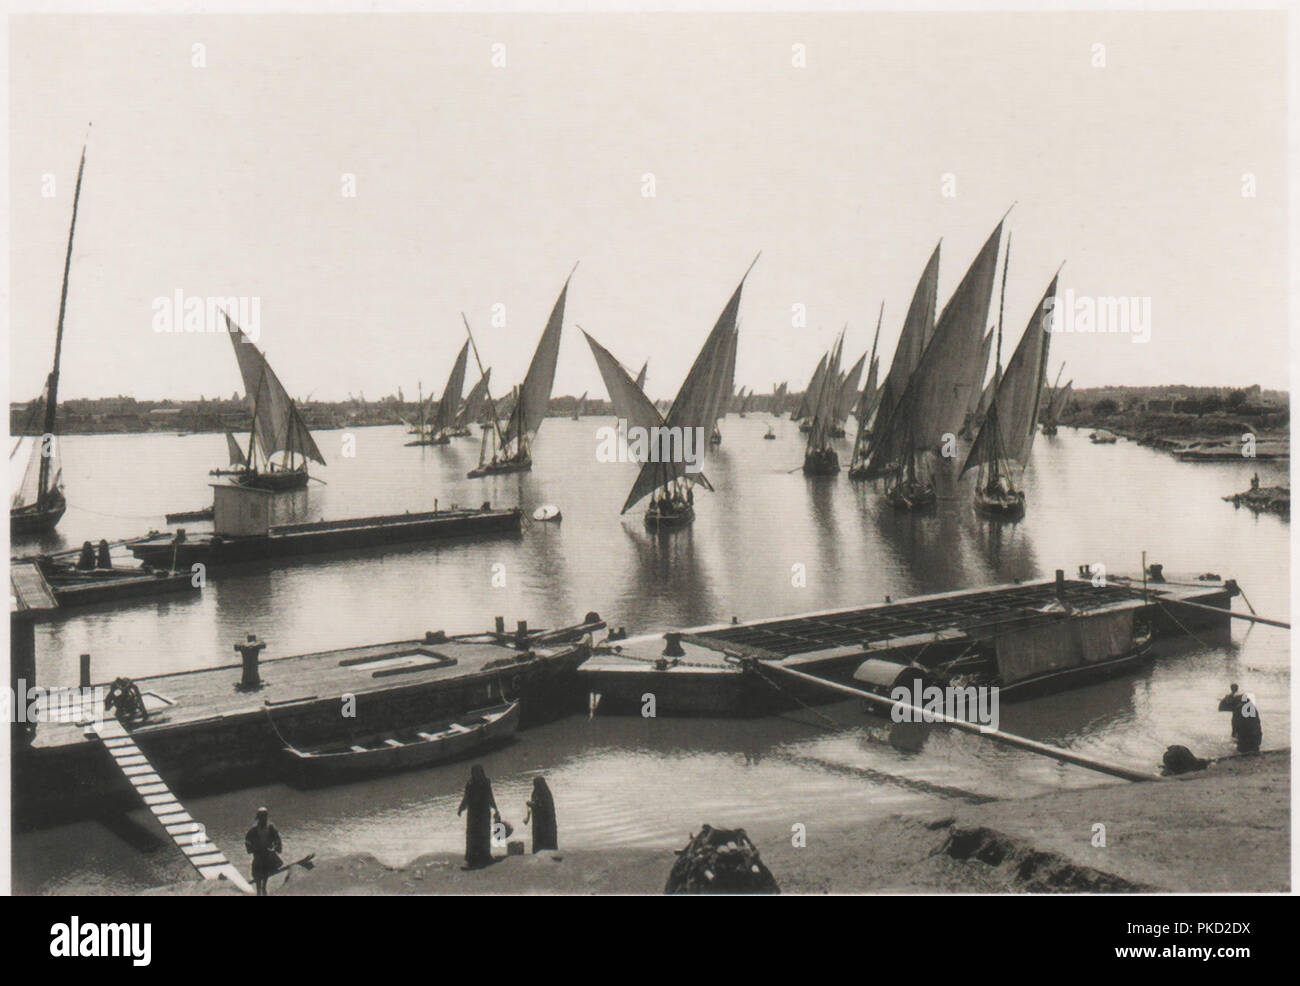 Vintage postcard showing Egyptian feluccas or dhows on the river Nile near Cairo circa 1929, photographed by the Austrian photographer Rudolf Lehnert Stock Photo